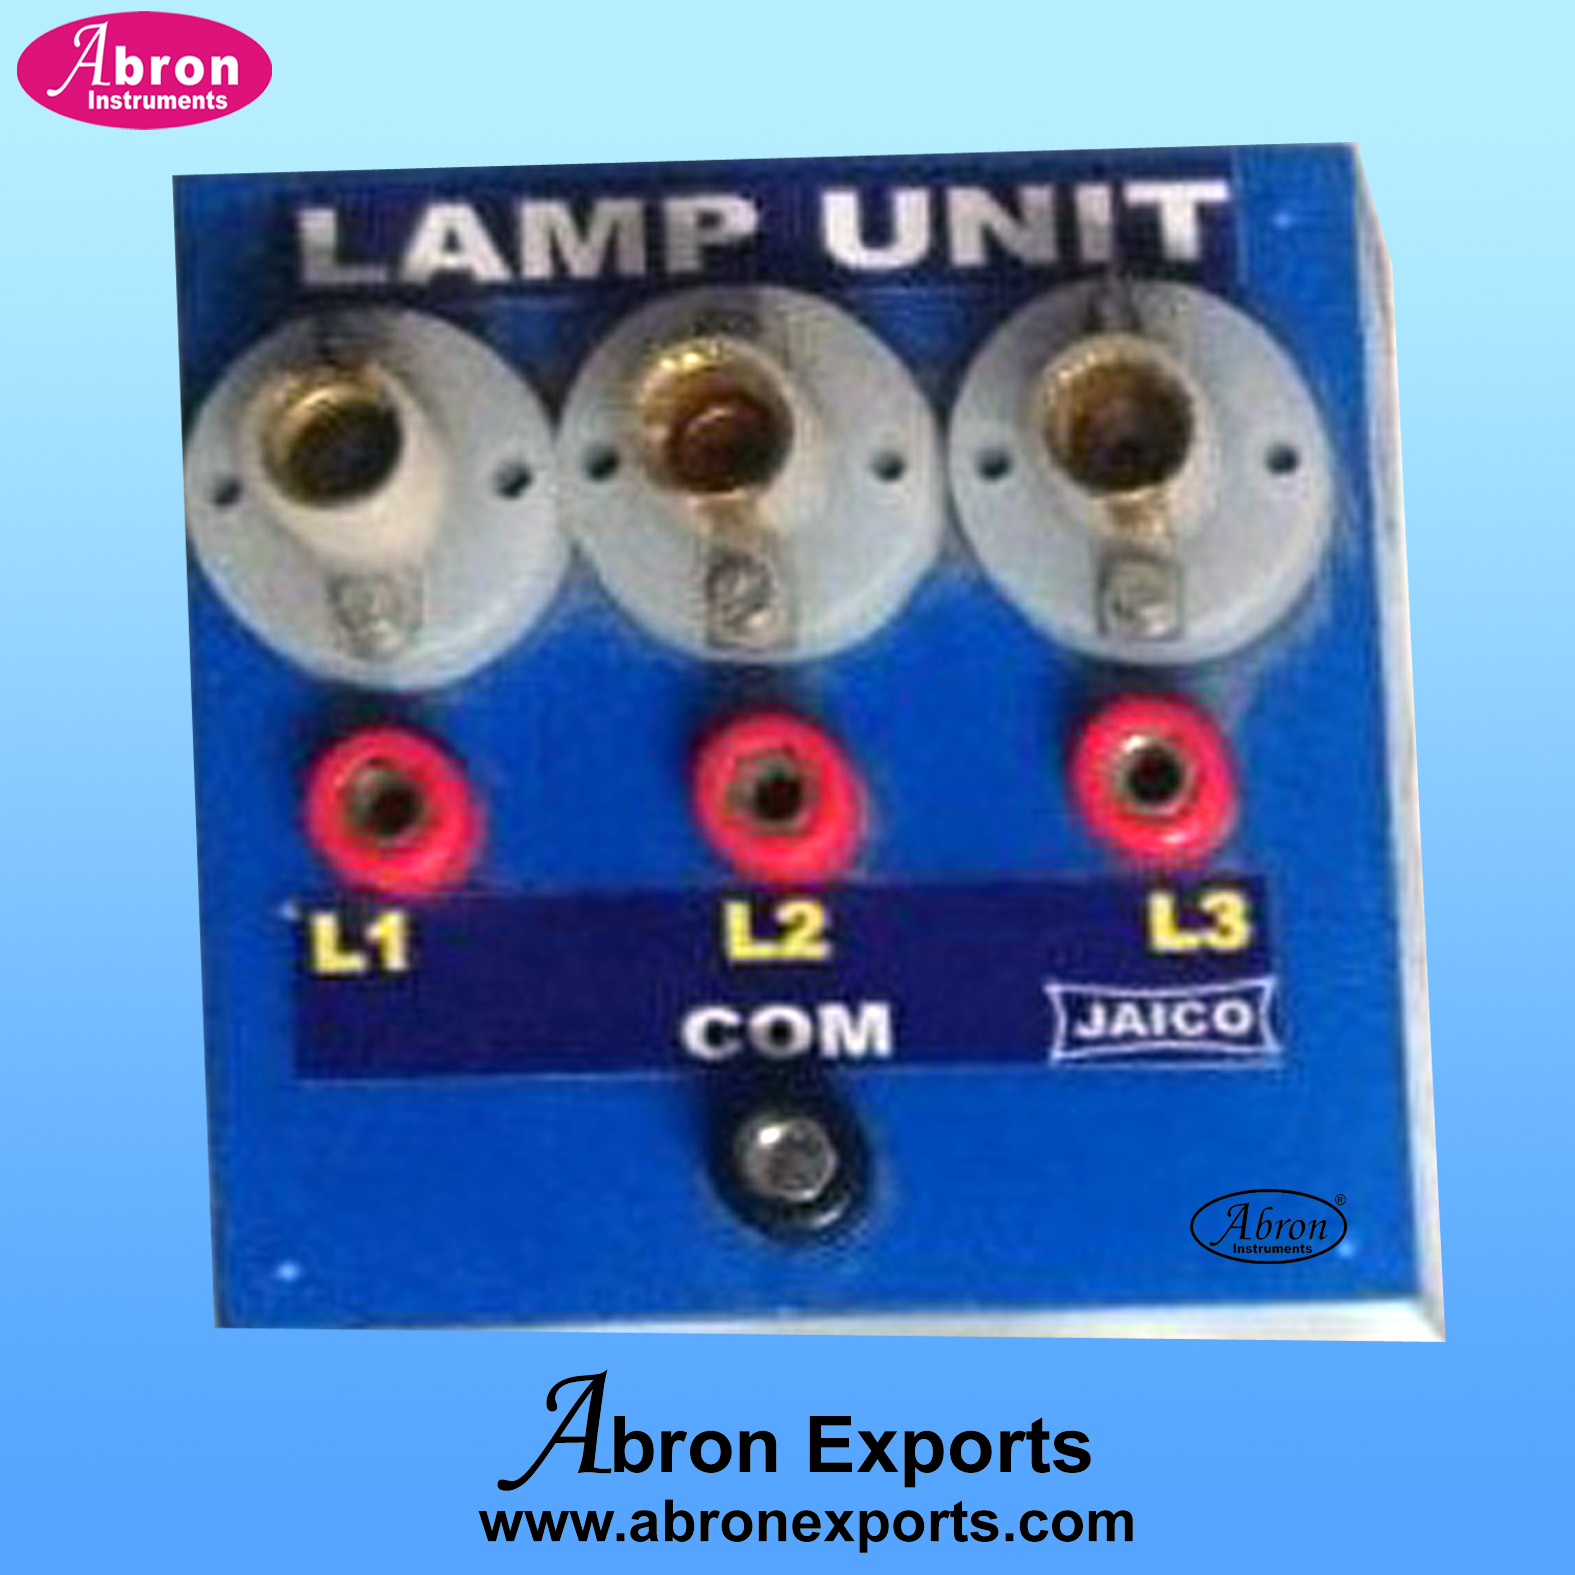 Electronic kit in box 3three lamp bulb 2vholder for series parallel circuits unit AE-1287-LP